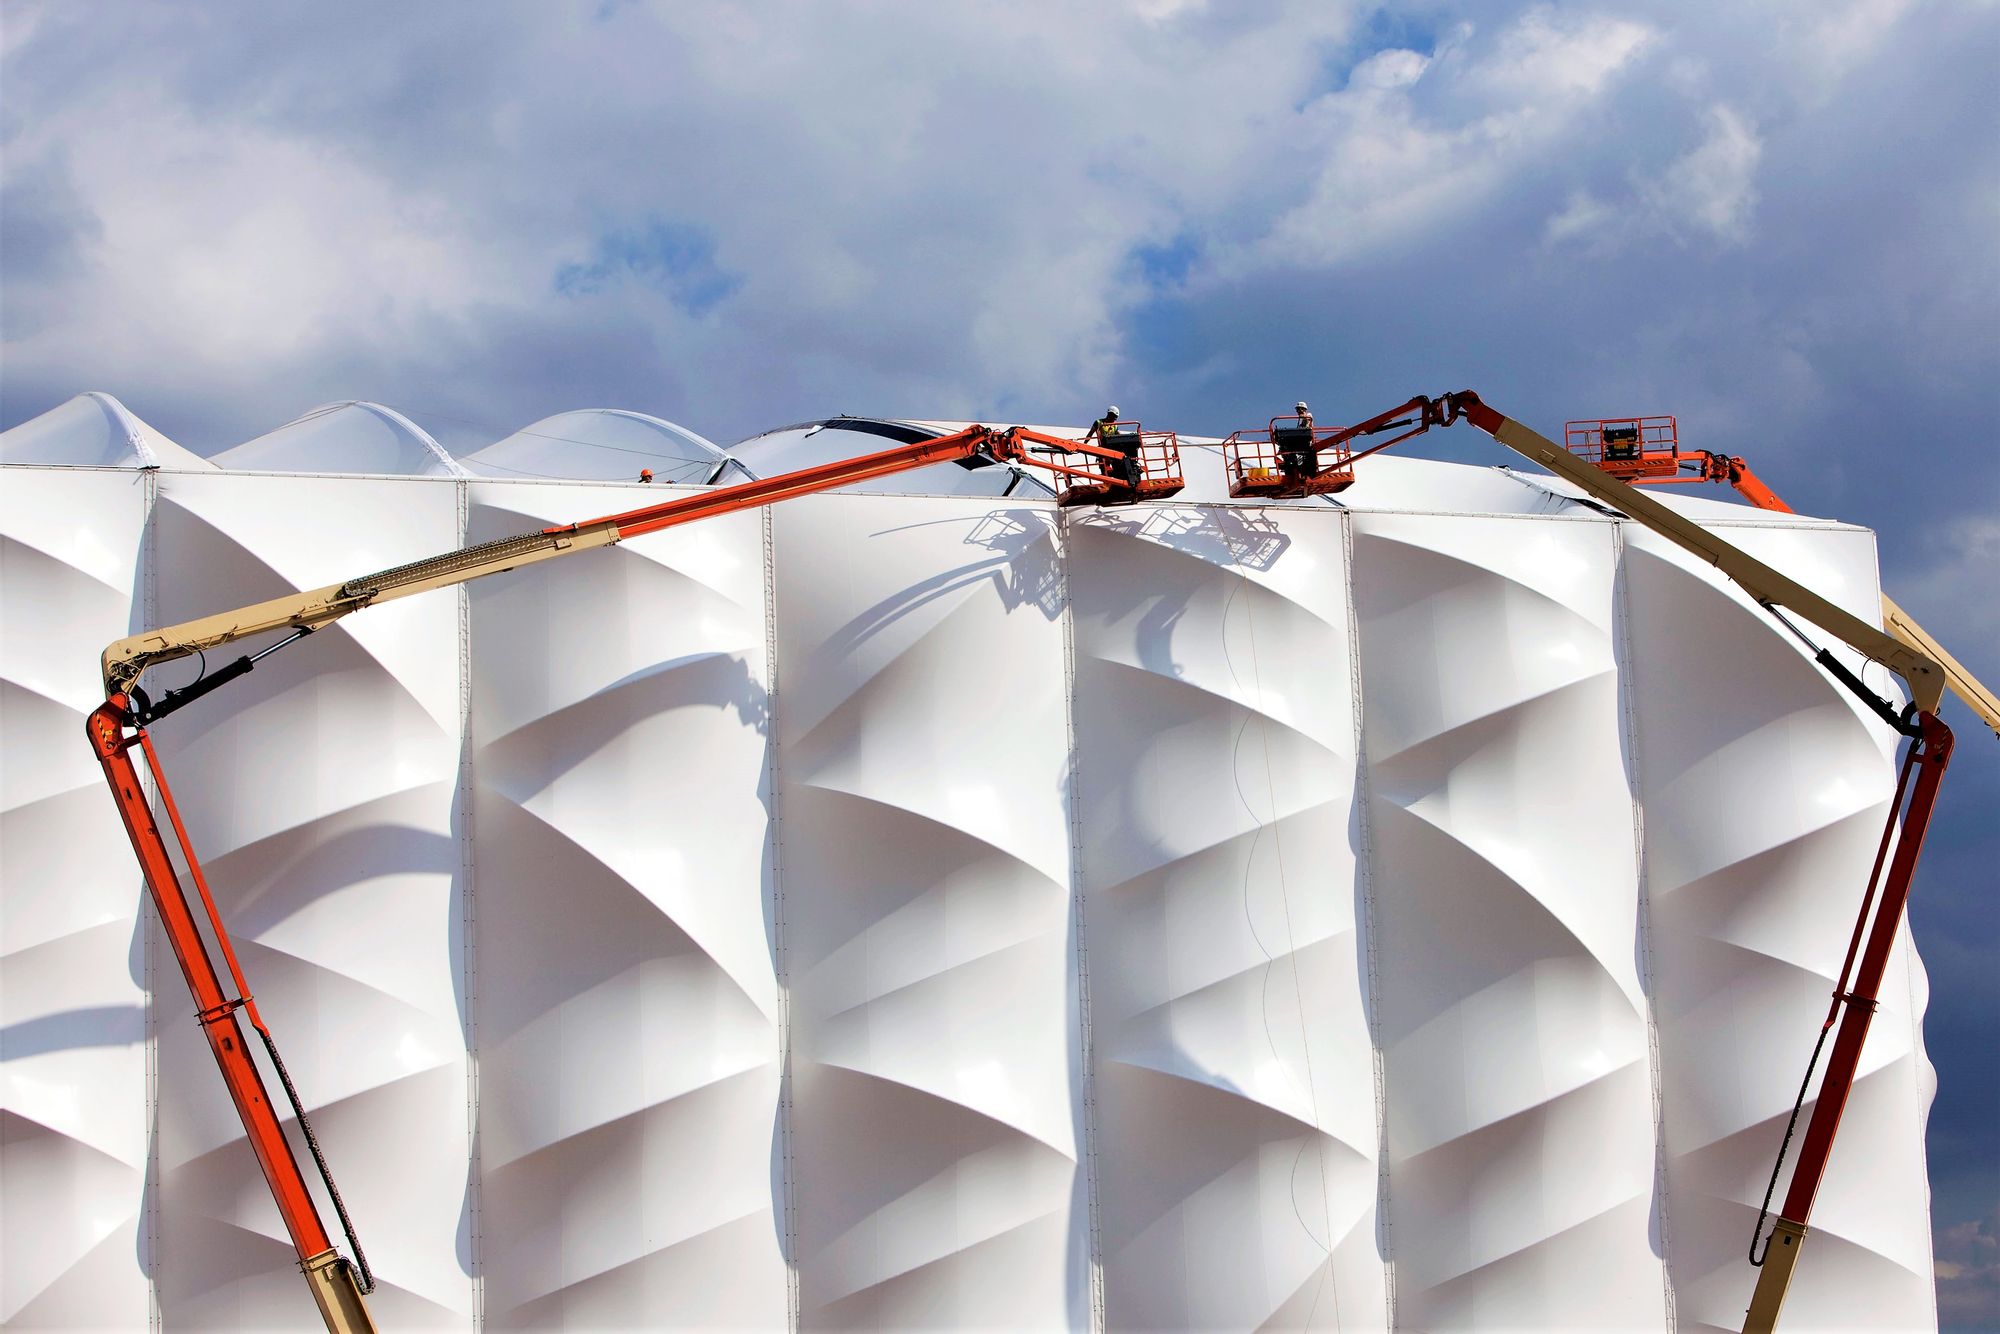 A Tensile fabric demountable structure built for the Basketball Arena for the London 2012 Olympic and Paralympic Games designed by Fenton Holloway. 